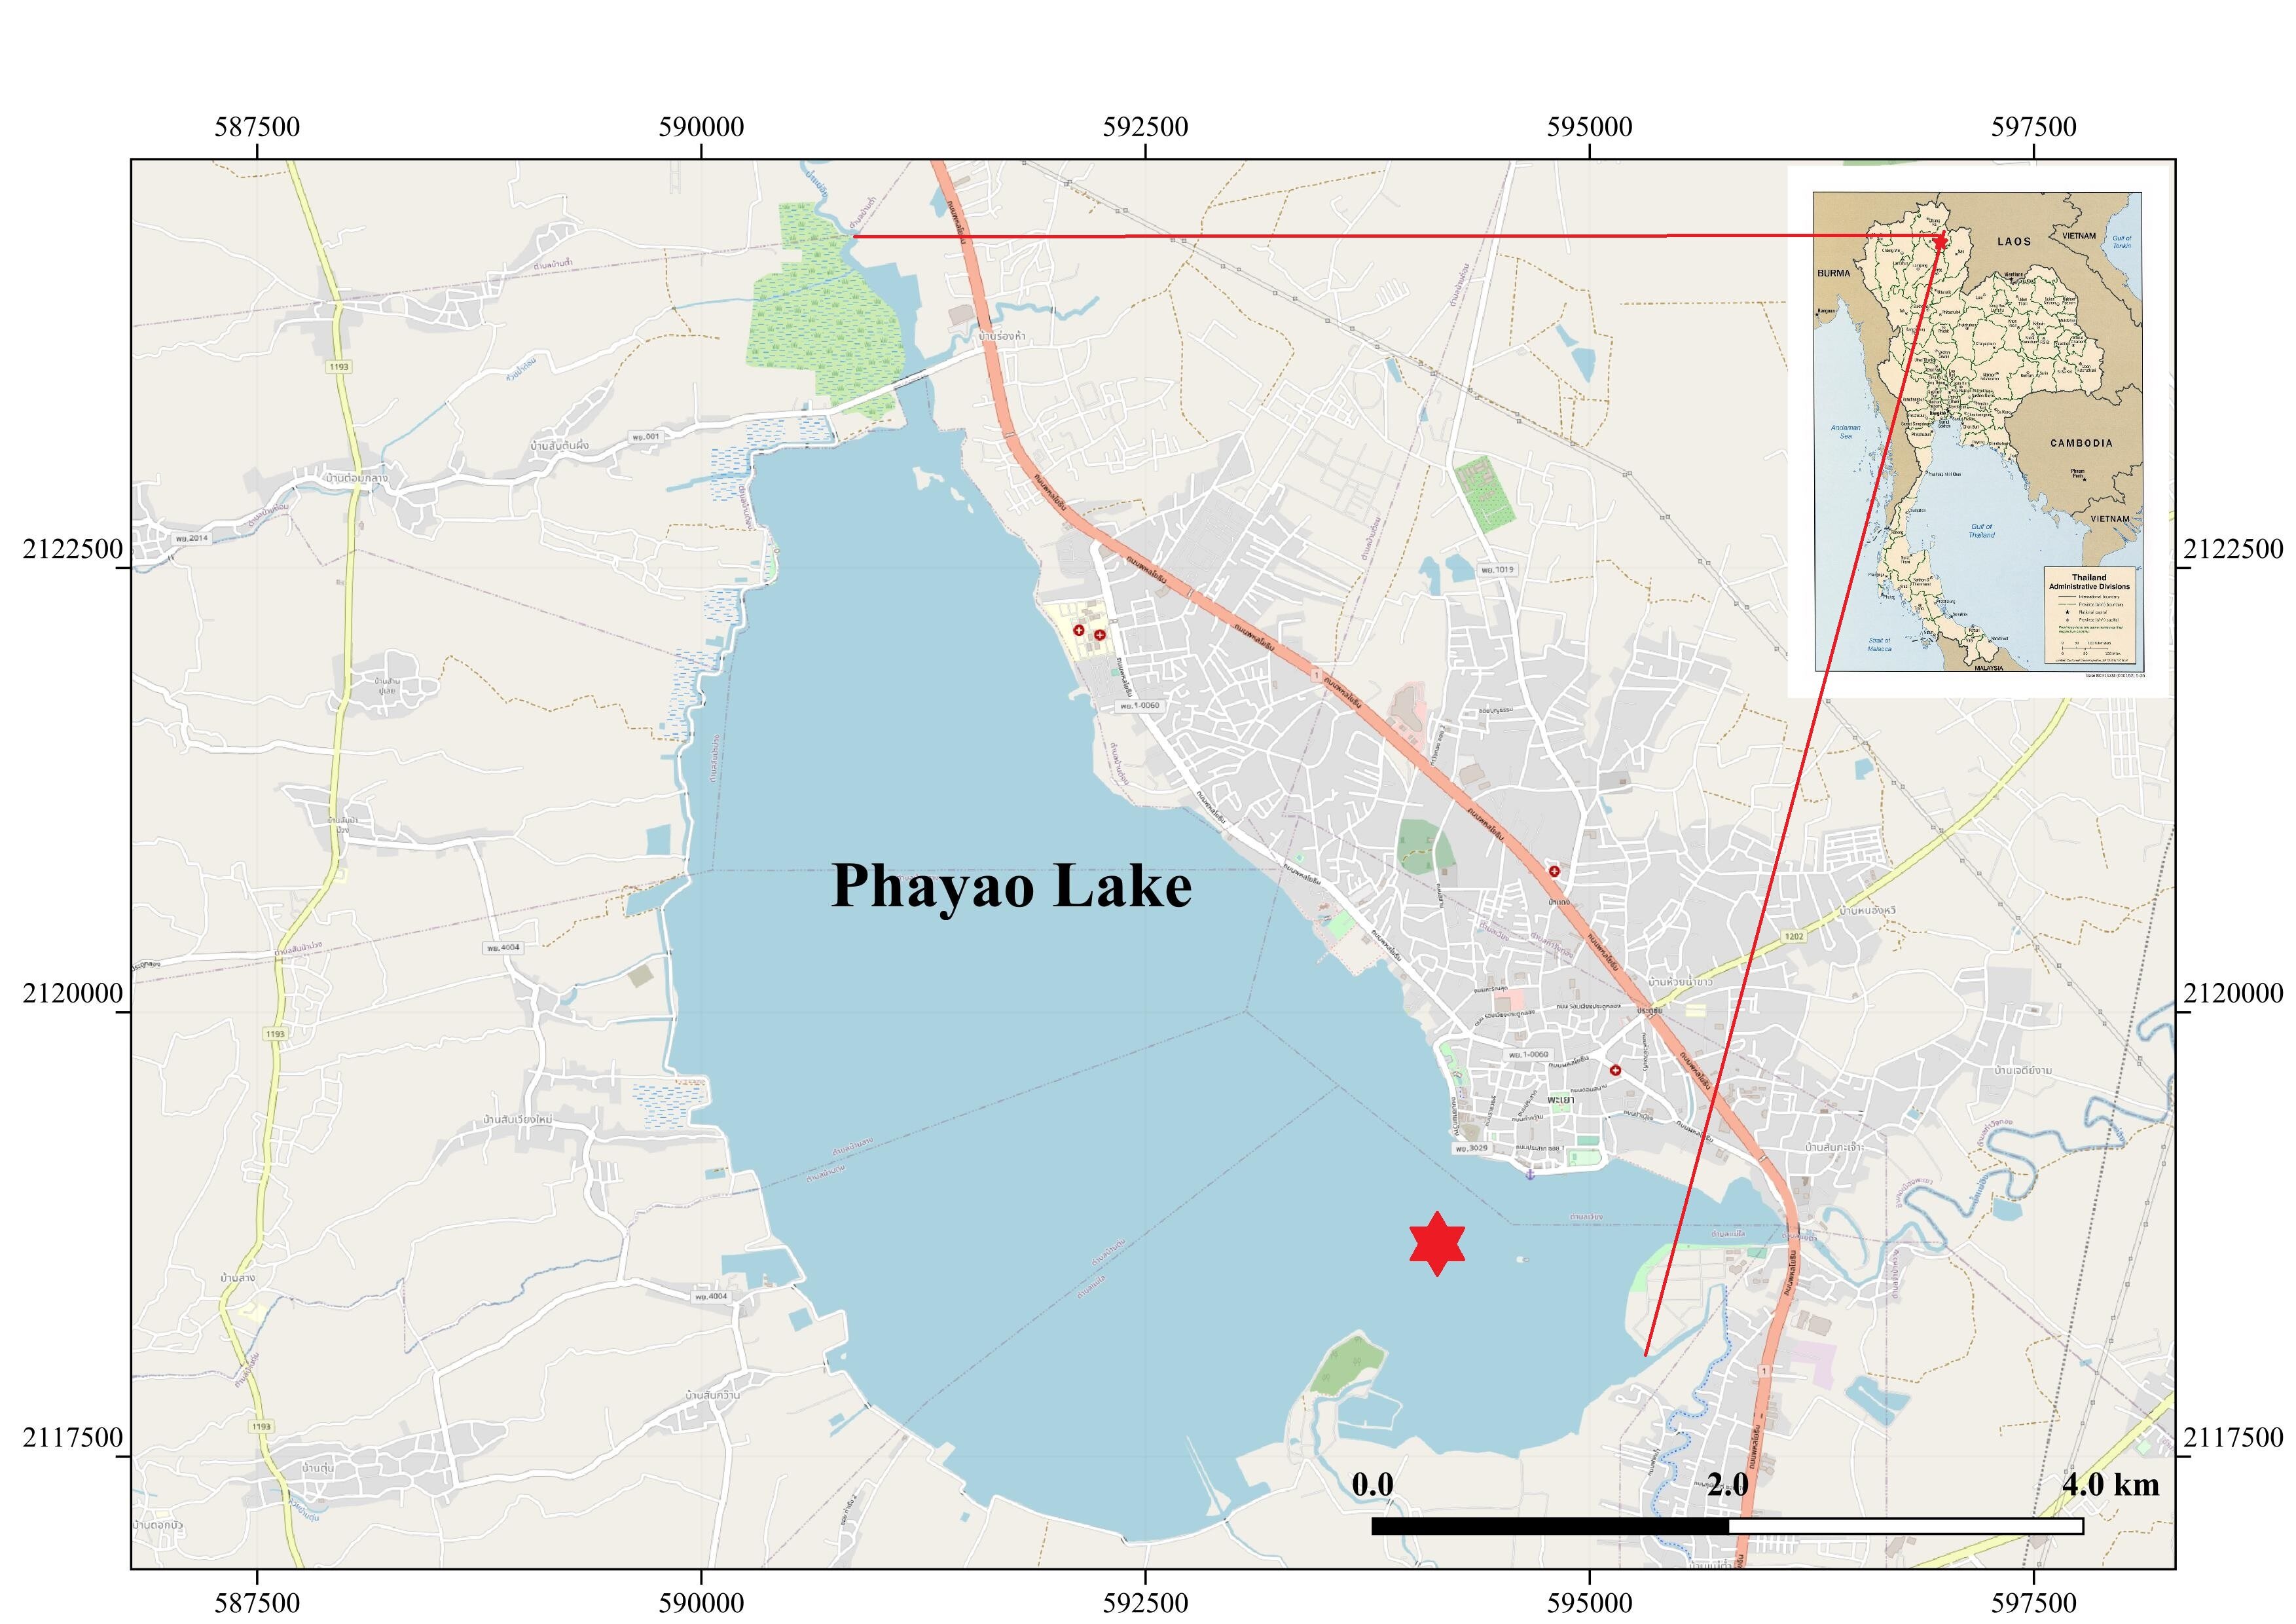 Ecological and health risks of polycyclic aromatic hydrocarbons in the sediment core of Phayao Lake, Thailand